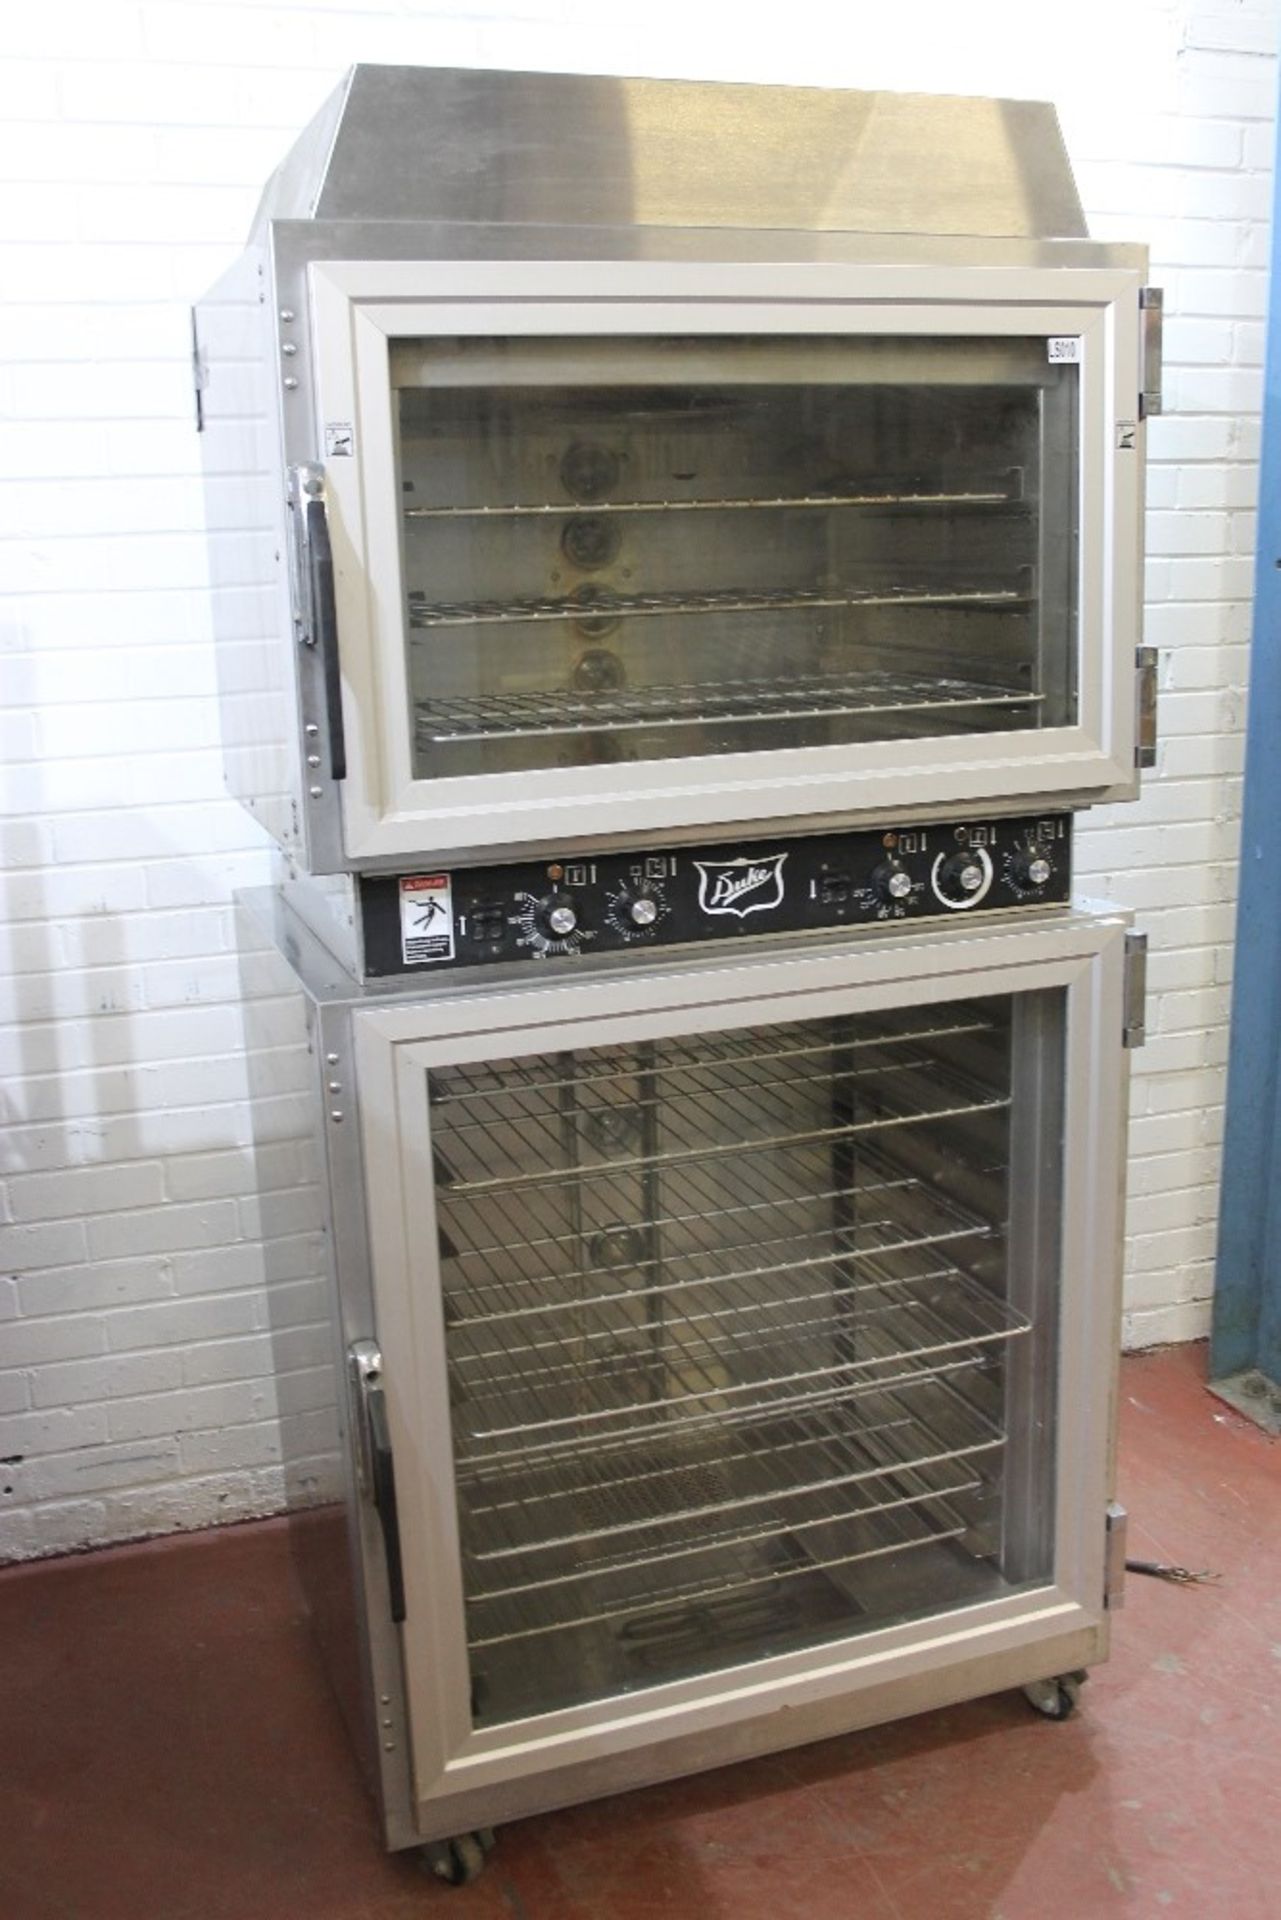 Duke Twin Ovens – 1 x Steam Oven – 1 x Convection Oven